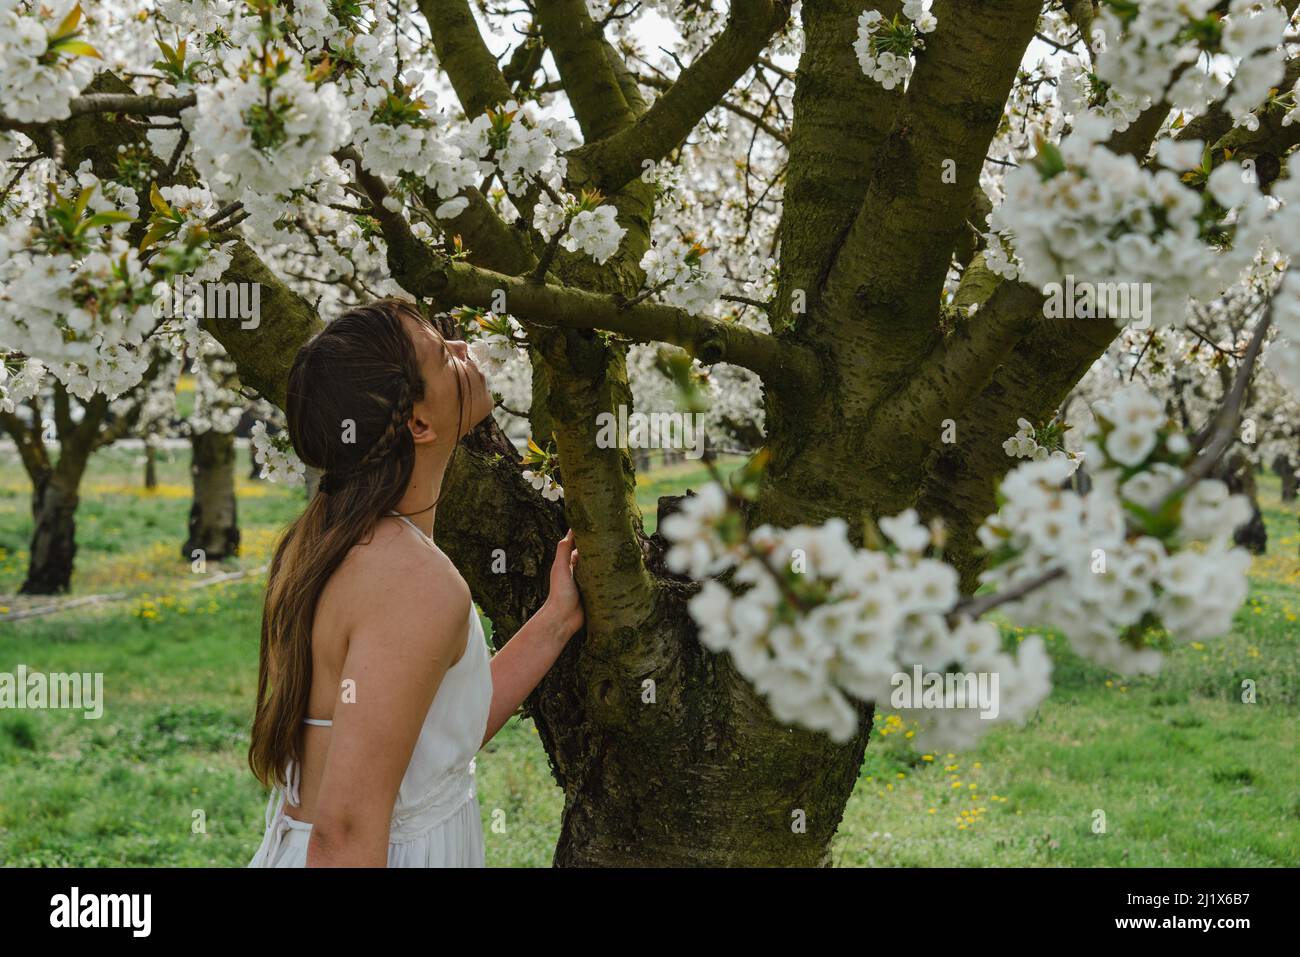 portrait of a young woman in cherry orchard with trees in blossom smelling the flowers. spring summer image . Stock Photo